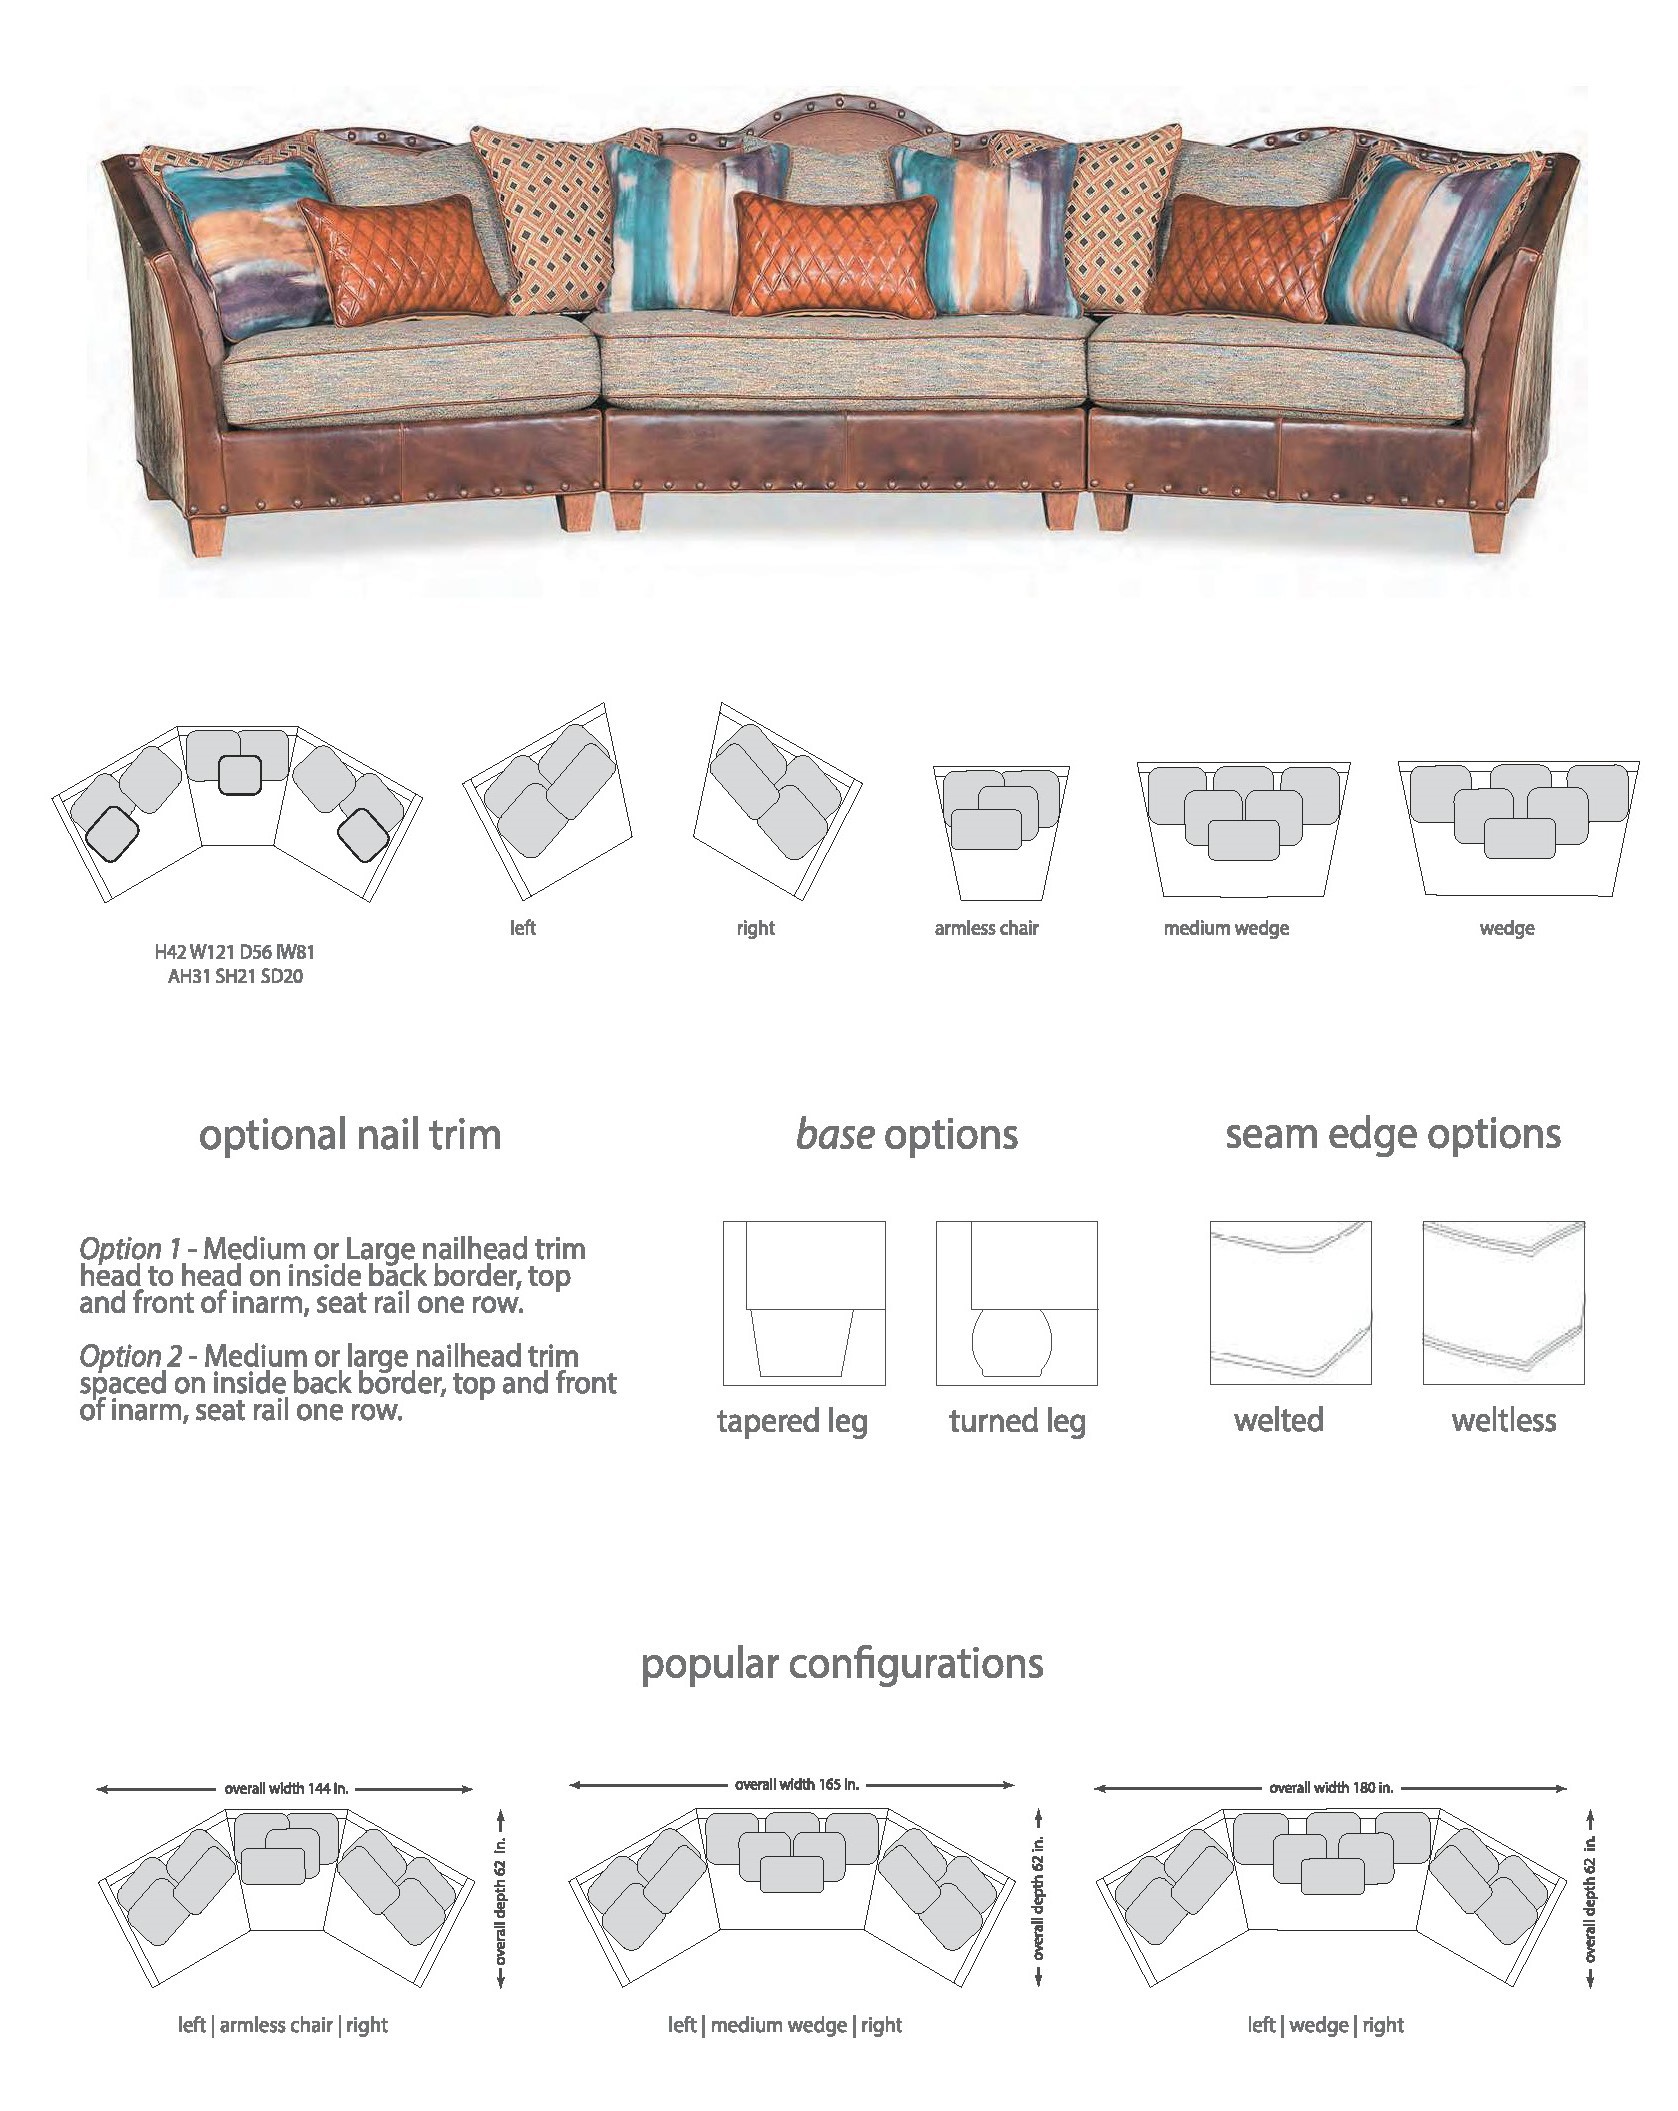 845 Sofa Chair Leather Fabric Sectional, Leather And Fabric Sectional Couch